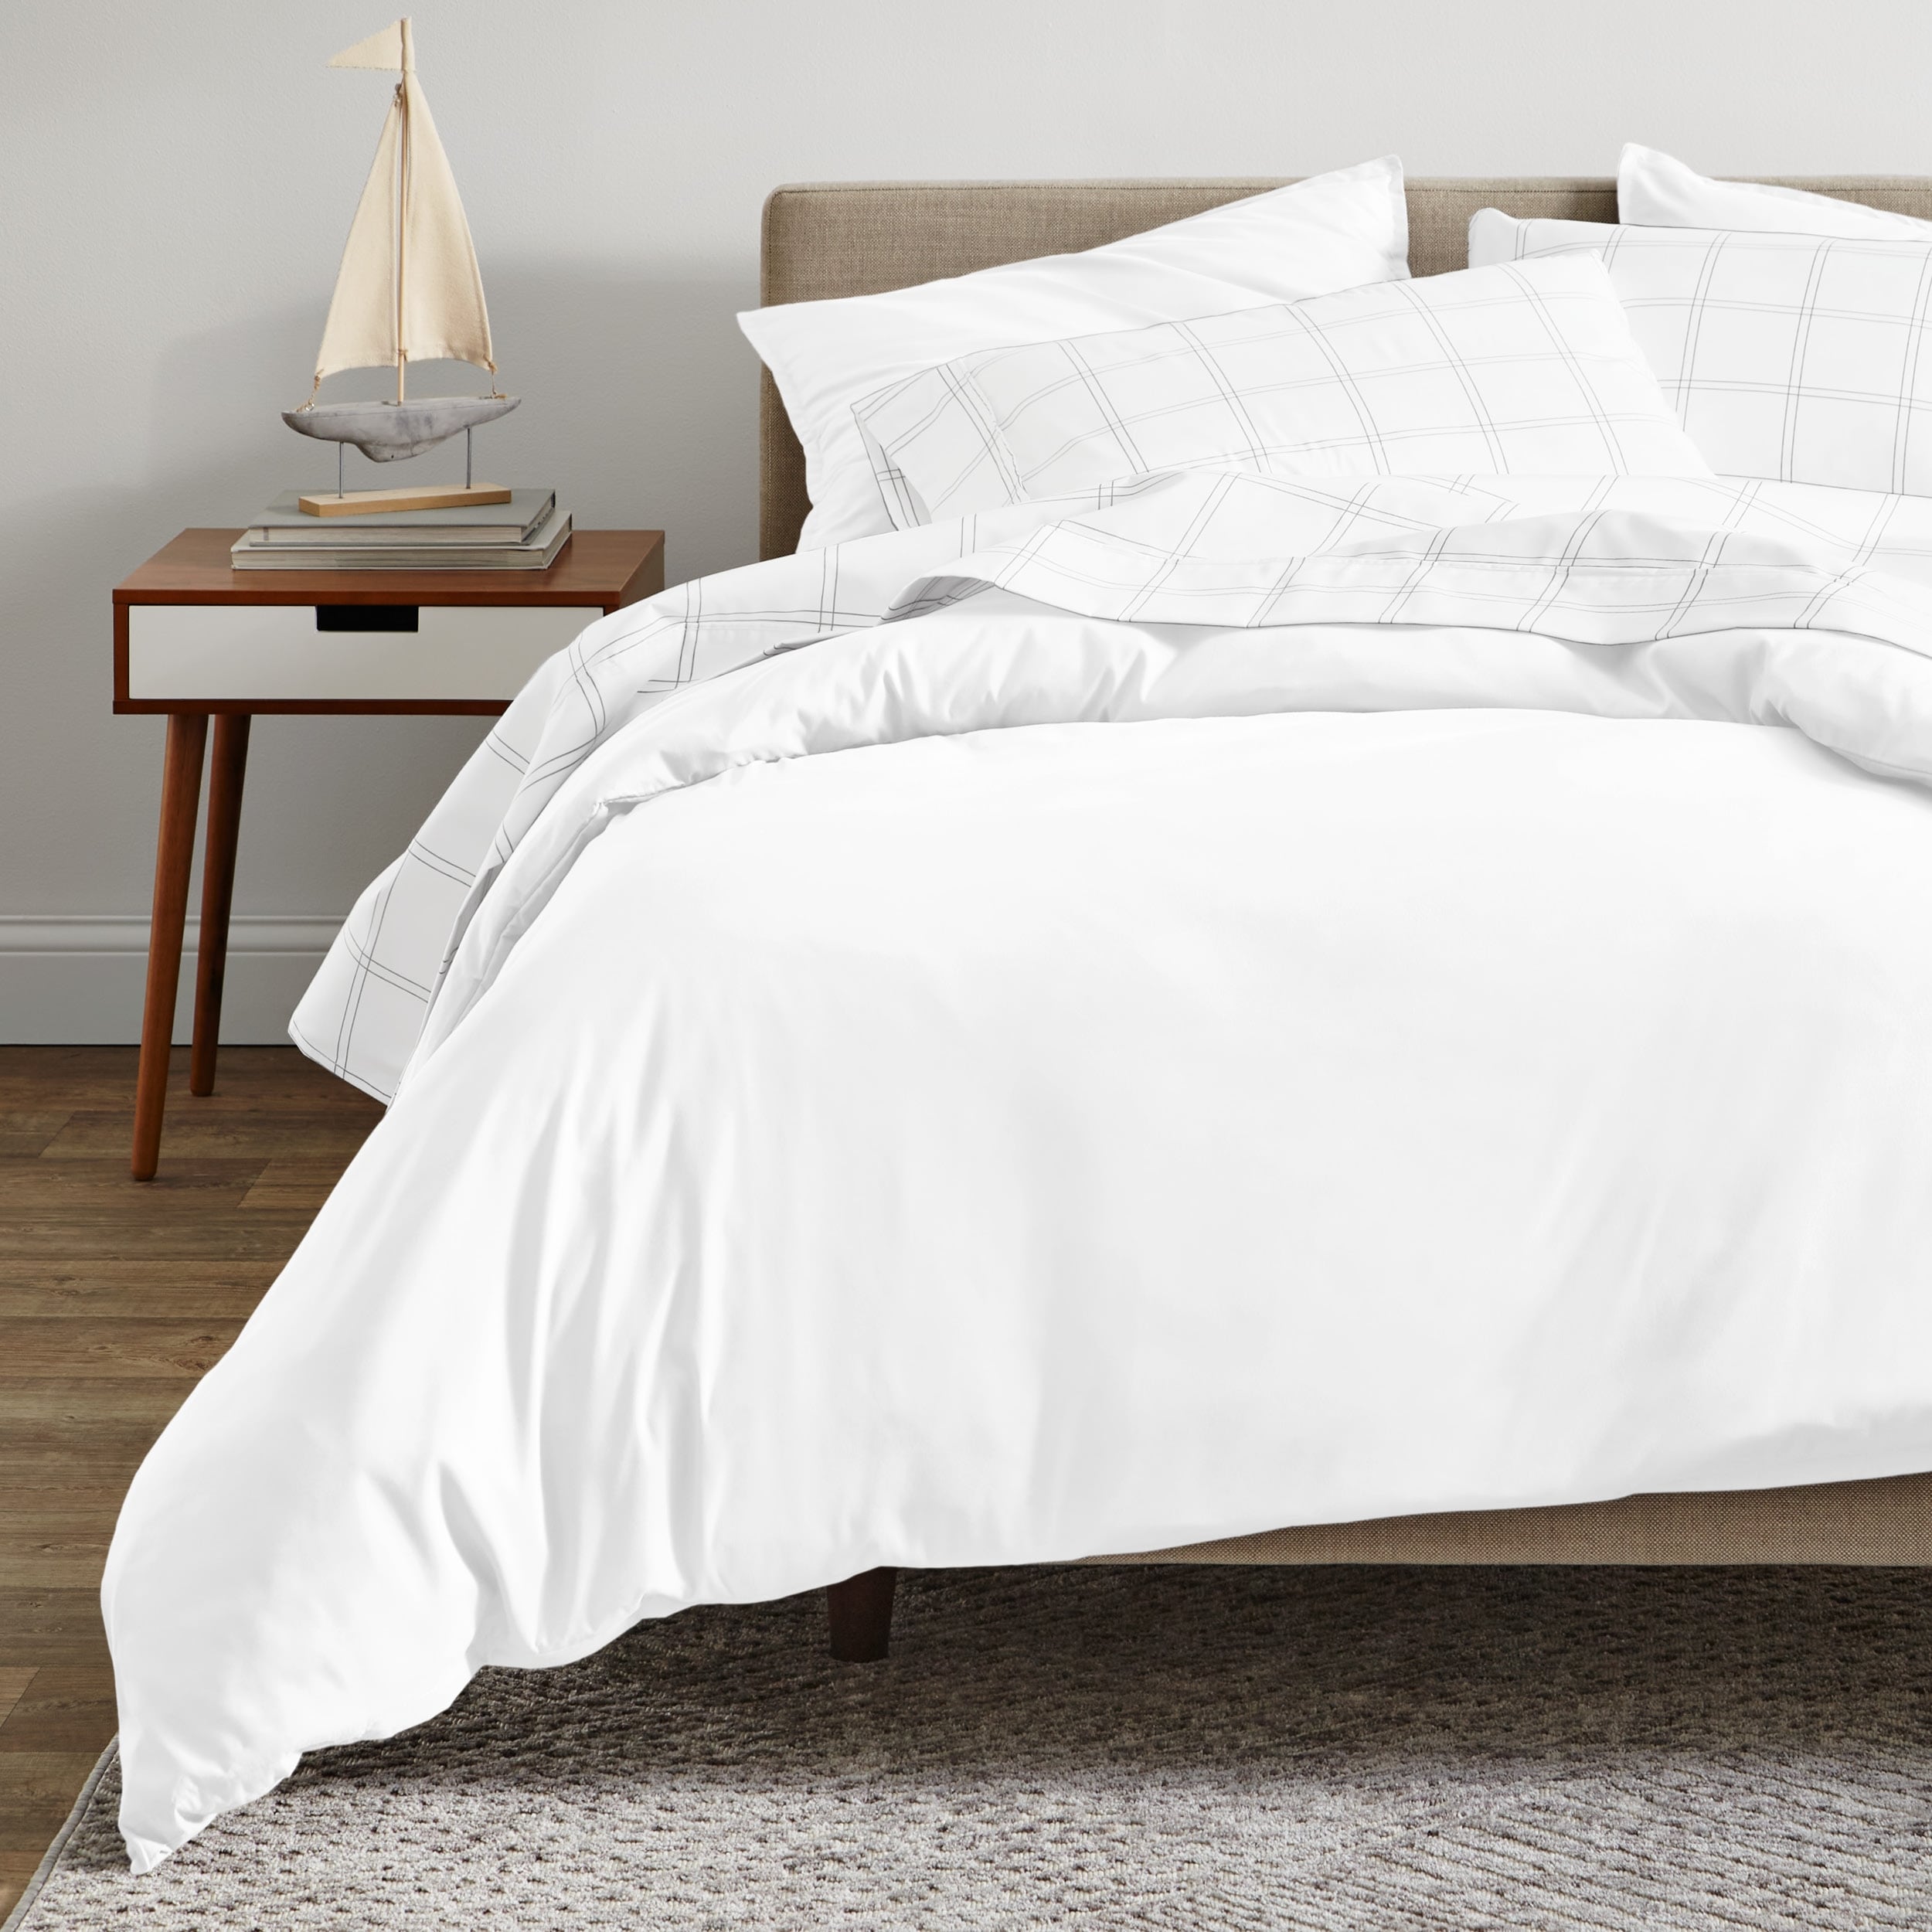 https://ak1.ostkcdn.com/images/products/is/images/direct/91cc3dcdcb841295262d7826ad2133c6f14b70a1/Bare-Home-Organic-Cotton-Duvet-Cover-Set---Smooth-Sateen-Weave.jpg